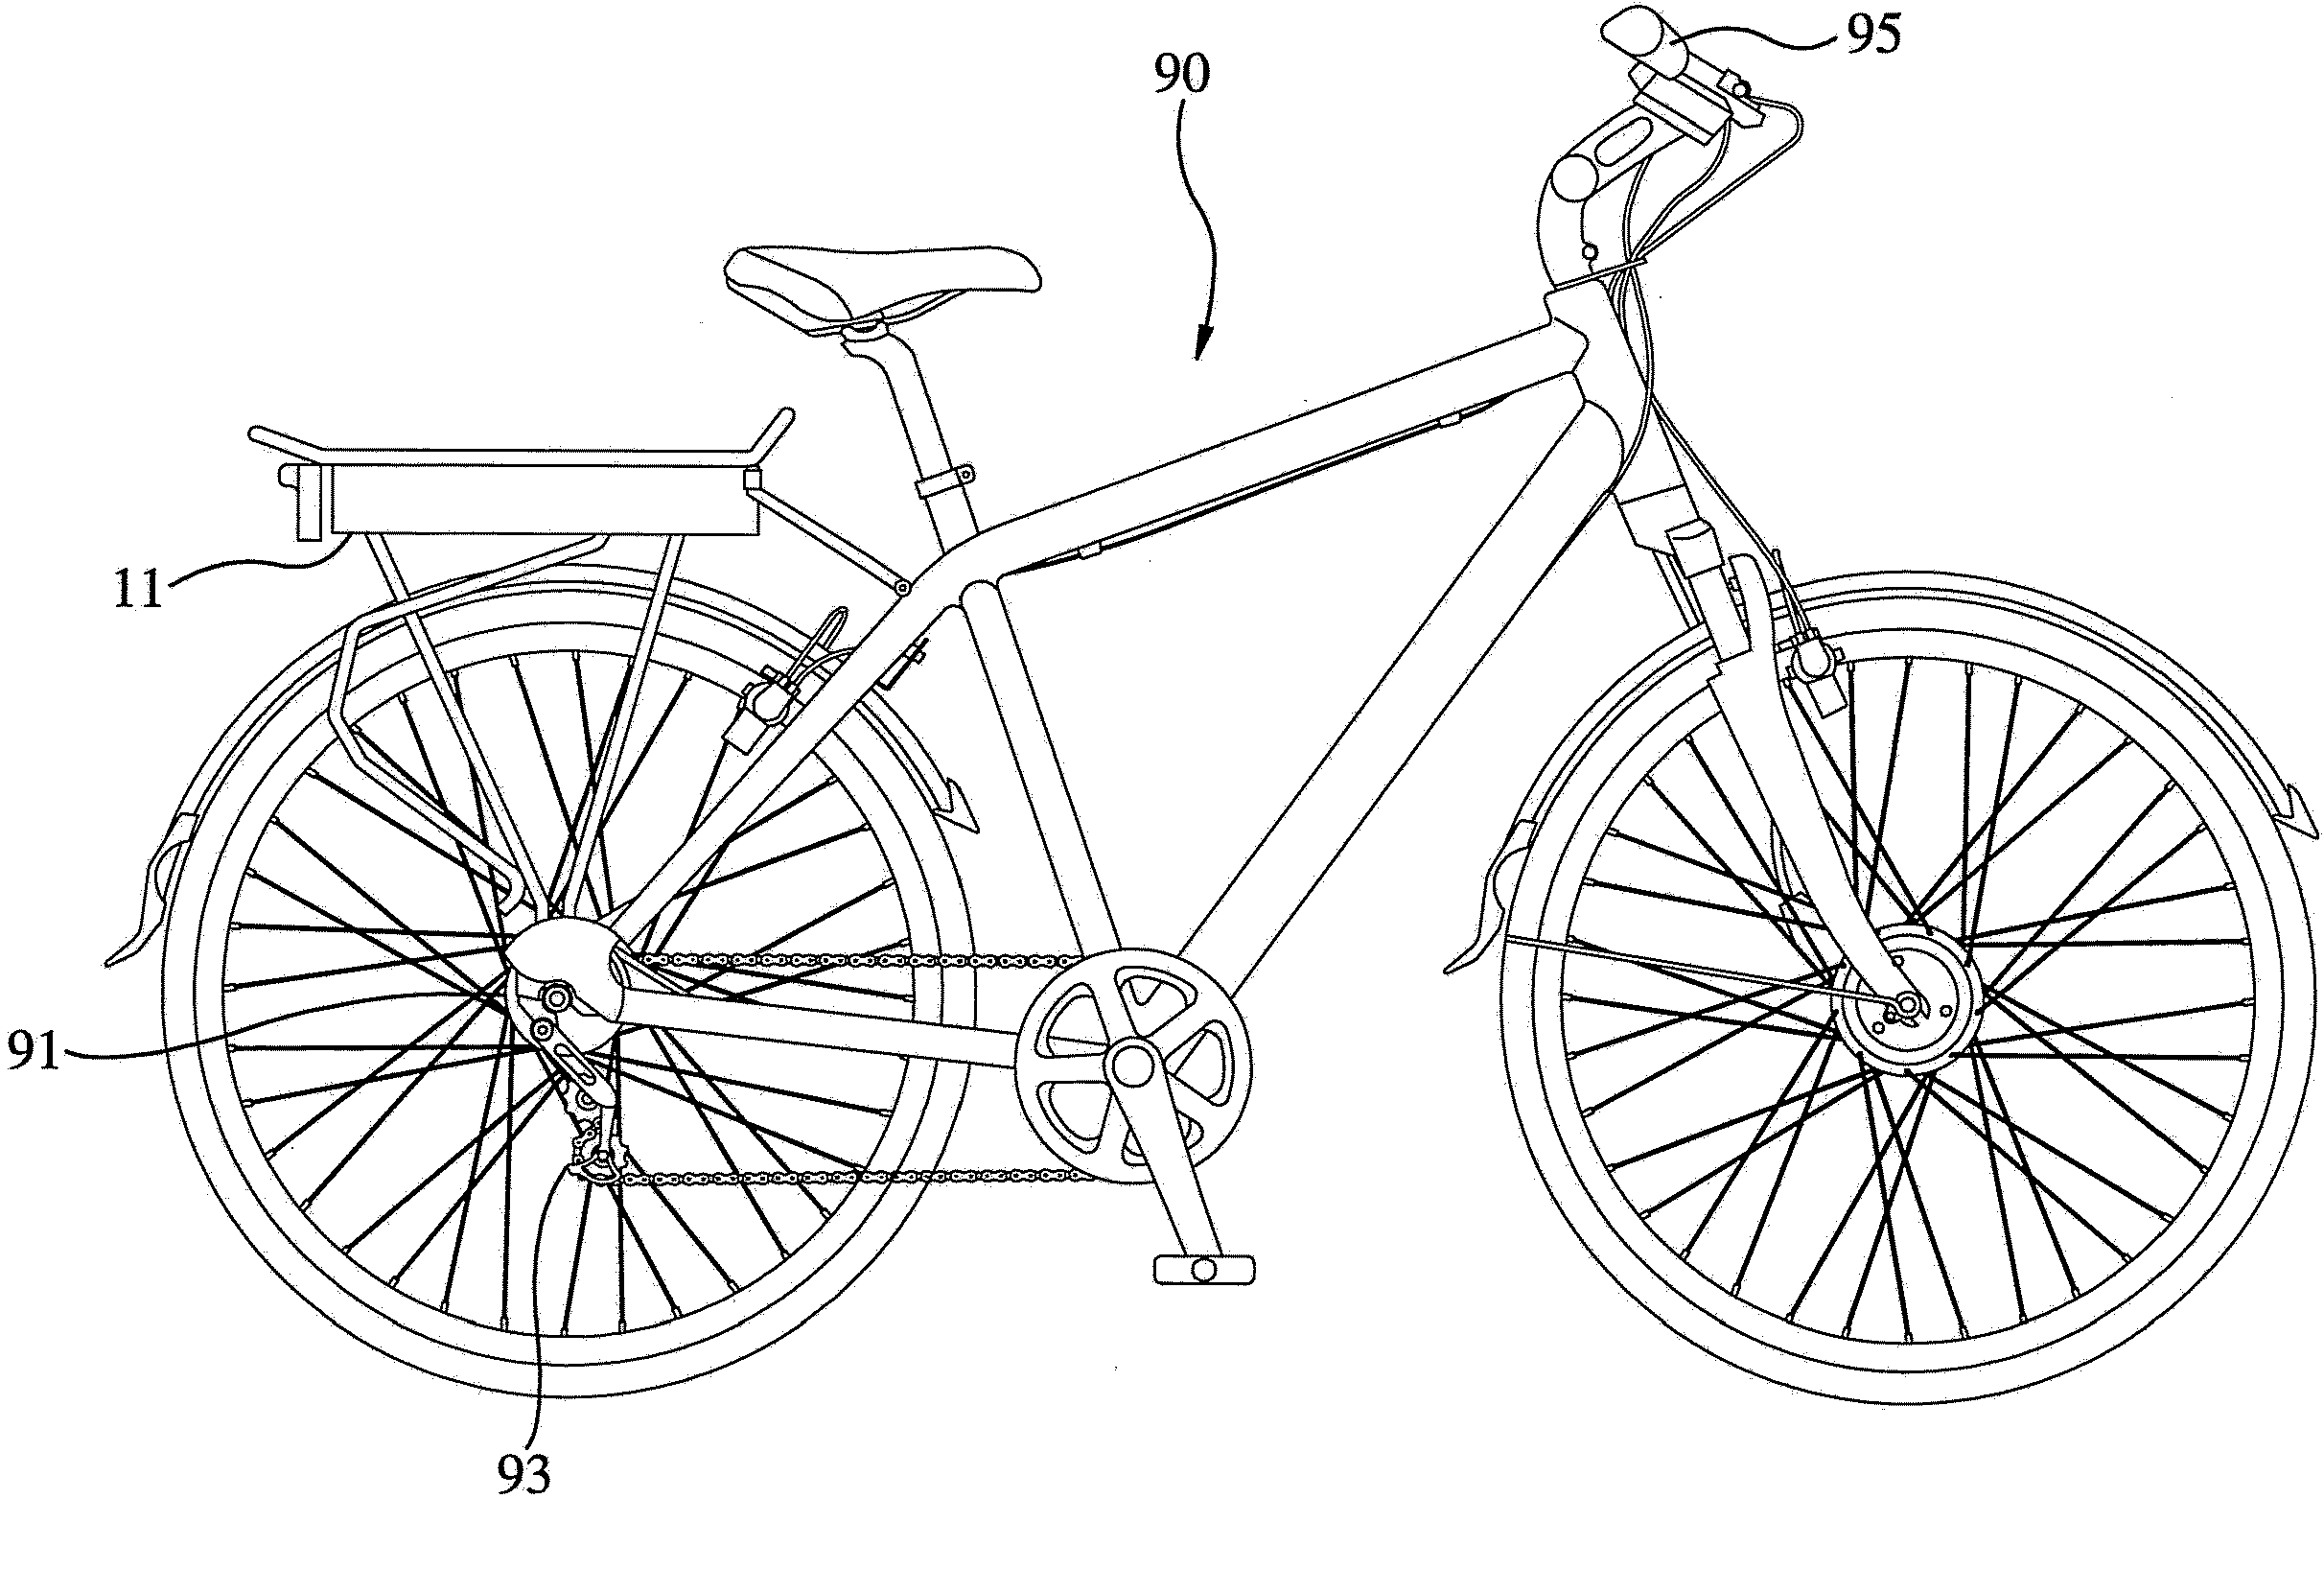 Riding safety protection system of power assisted bicycle